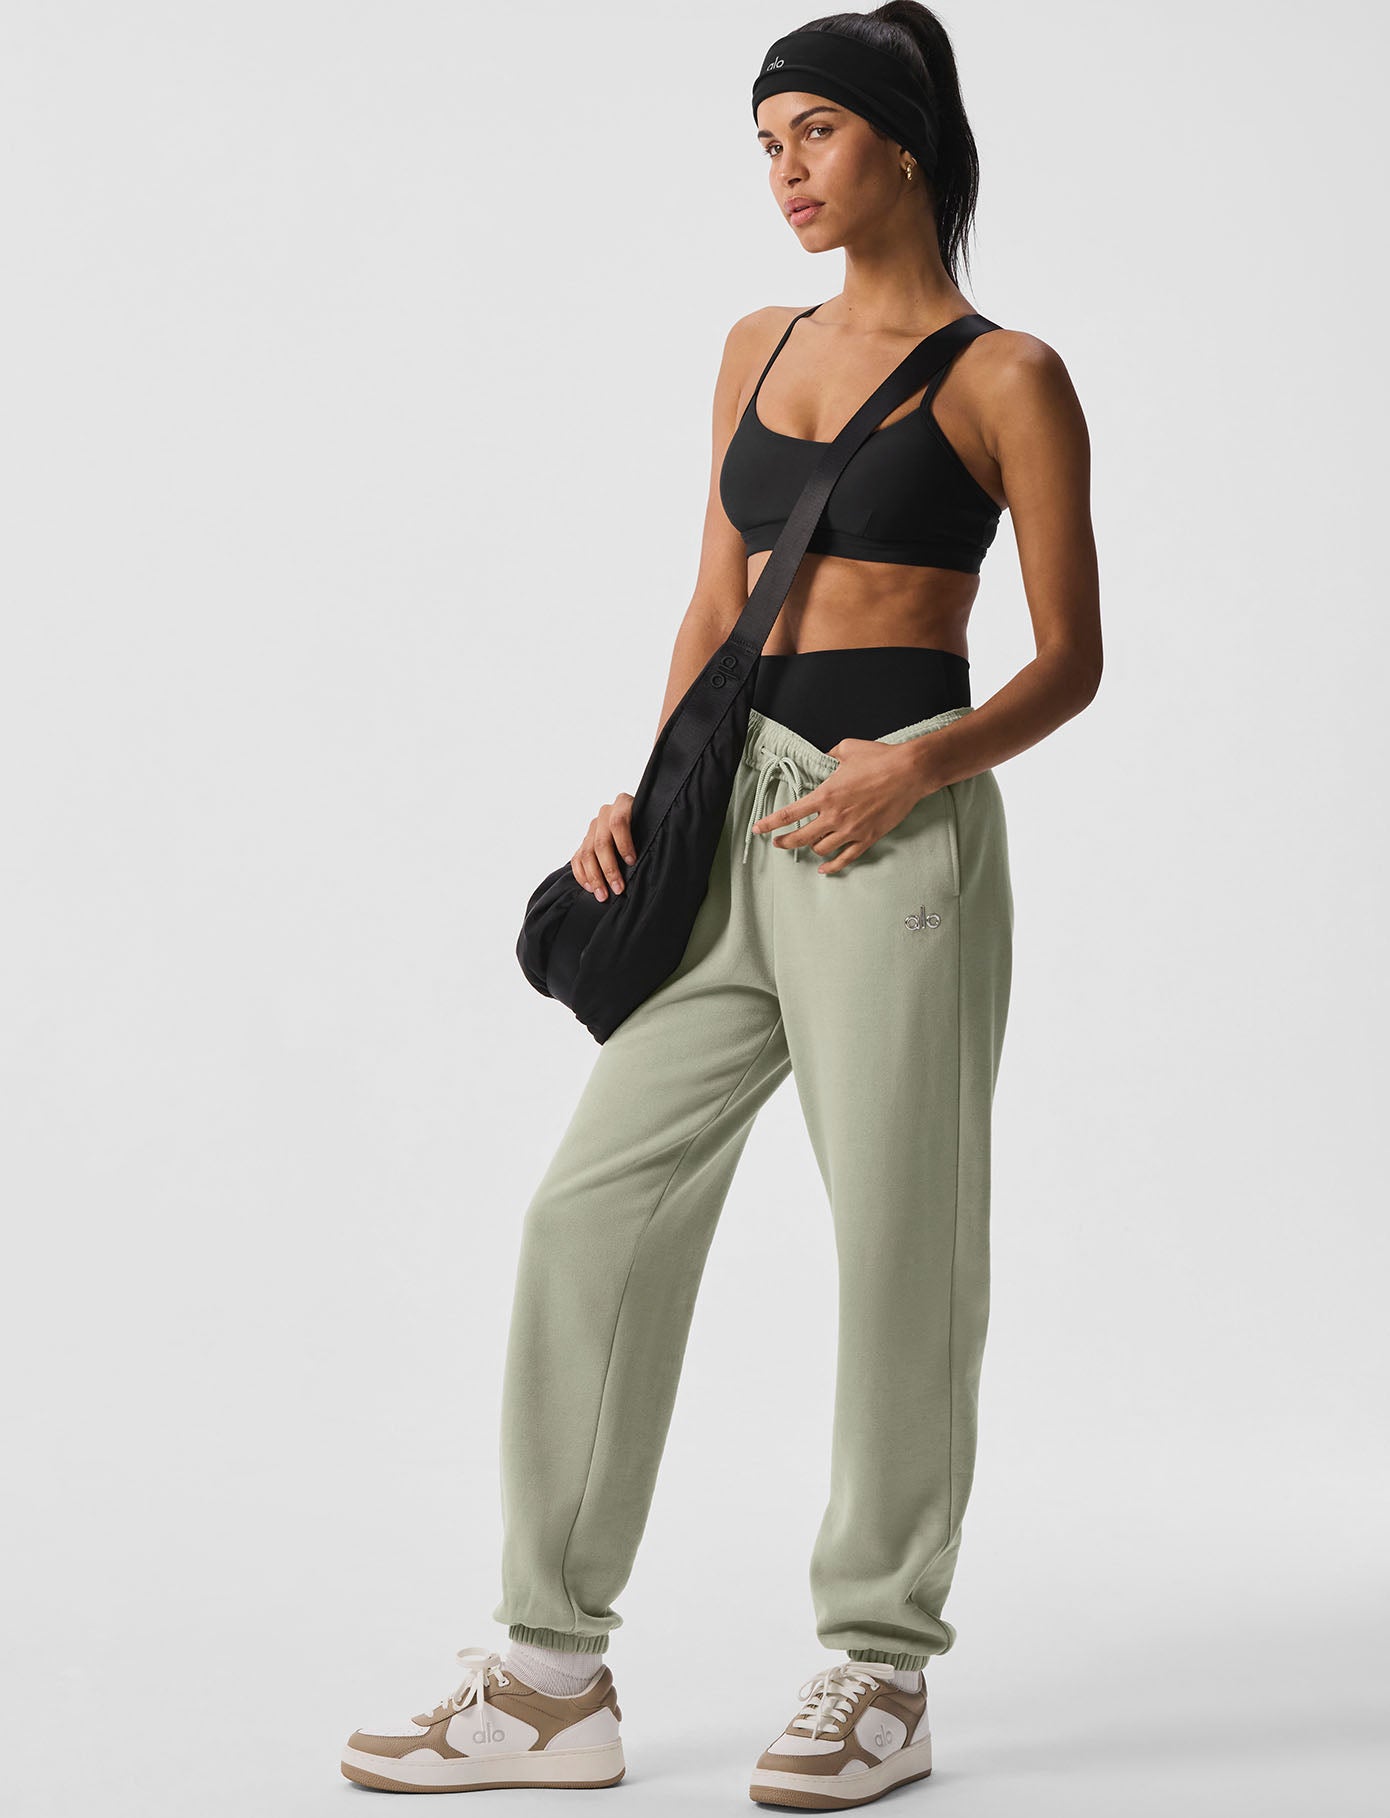 Shop ALO Yoga Unisex Street Style Activewear Bags by Brown‐Fluffy